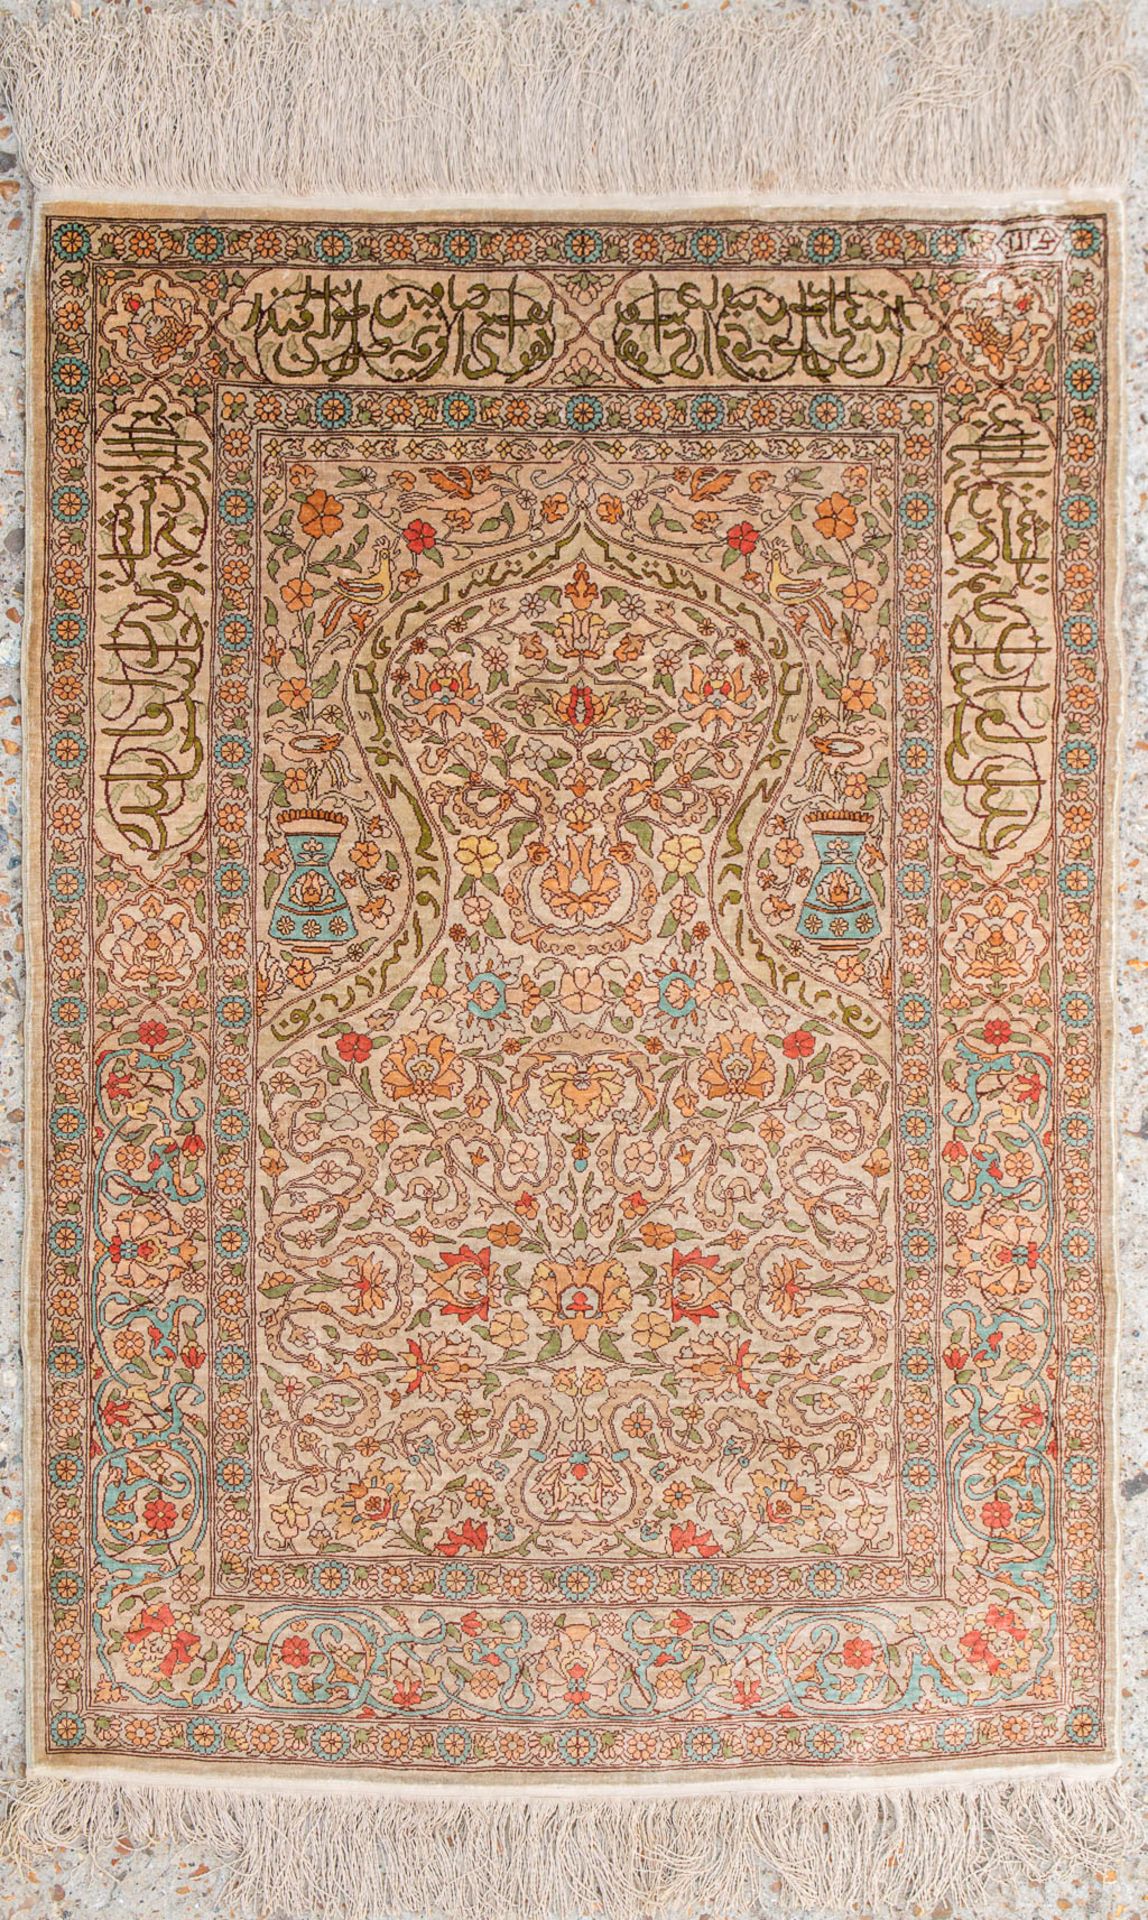 An Oriental hand-made carpet made of silk and signed. (73,5 x 107 cm)